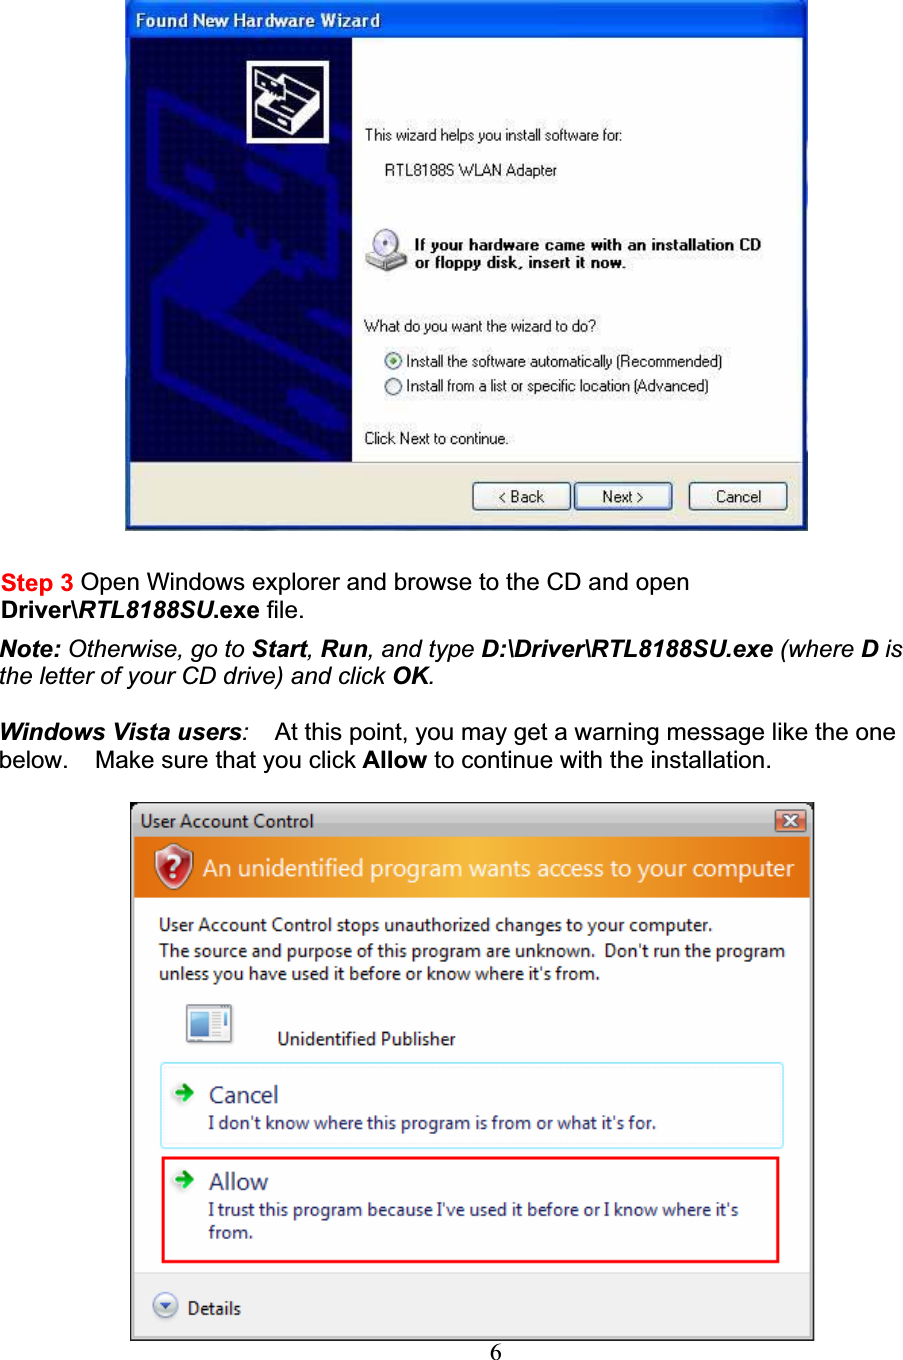 6Step 3 Open Windows explorer and browse to the CD and open Driver\RTL8188SU.exe file.Note: Otherwise, go to Start,Run, and type D:\Driver\RTL8188SU.exe (where Dis the letter of your CD drive) and click OK.Windows Vista users:At this point, you may get a warning message like the one below. Make sure that you click Allow to continue with the installation.